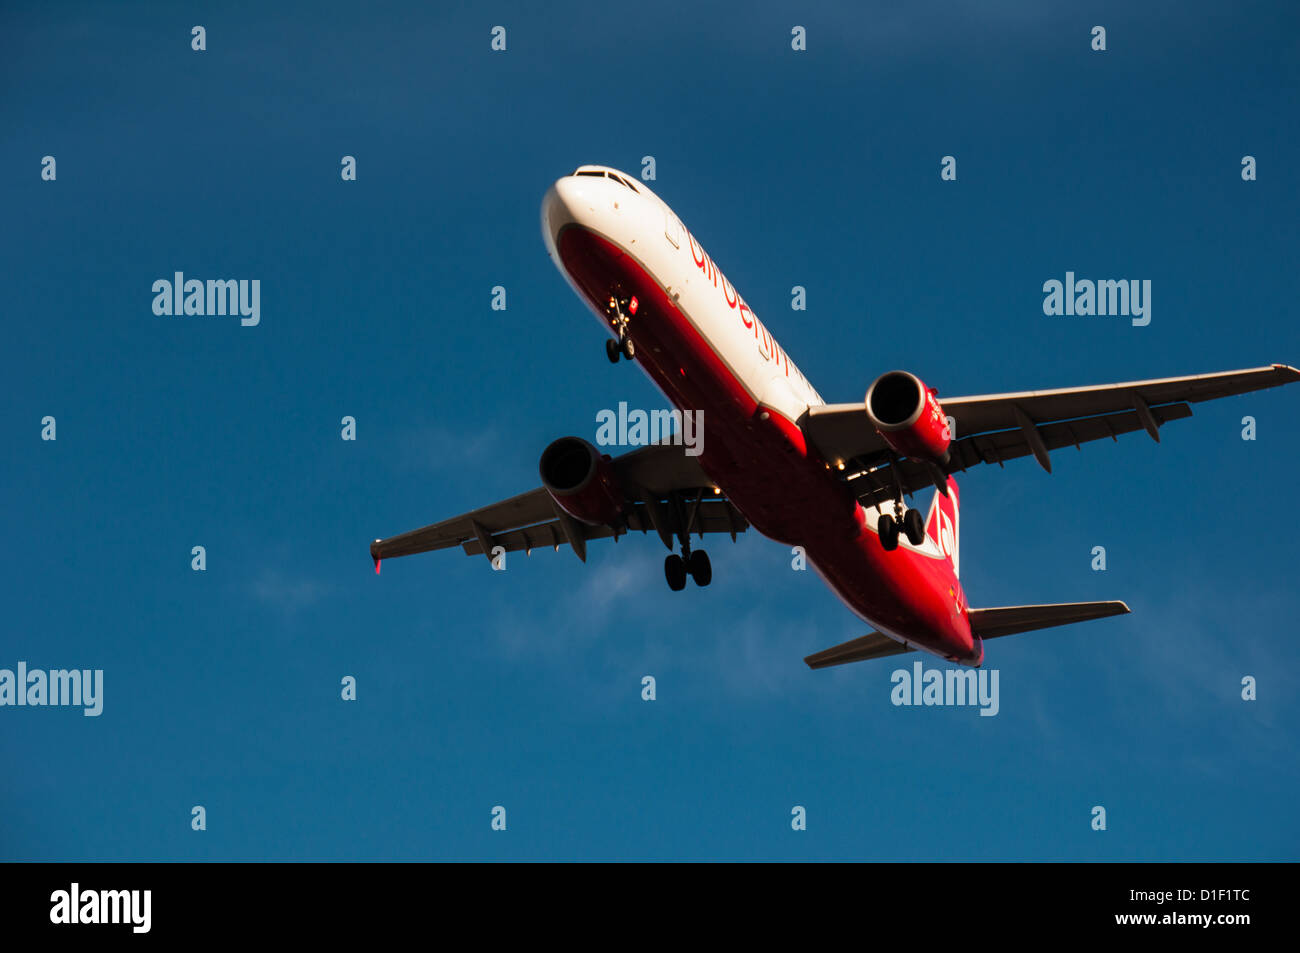 Red and white commercial plane approachs the landing strip Stock Photo